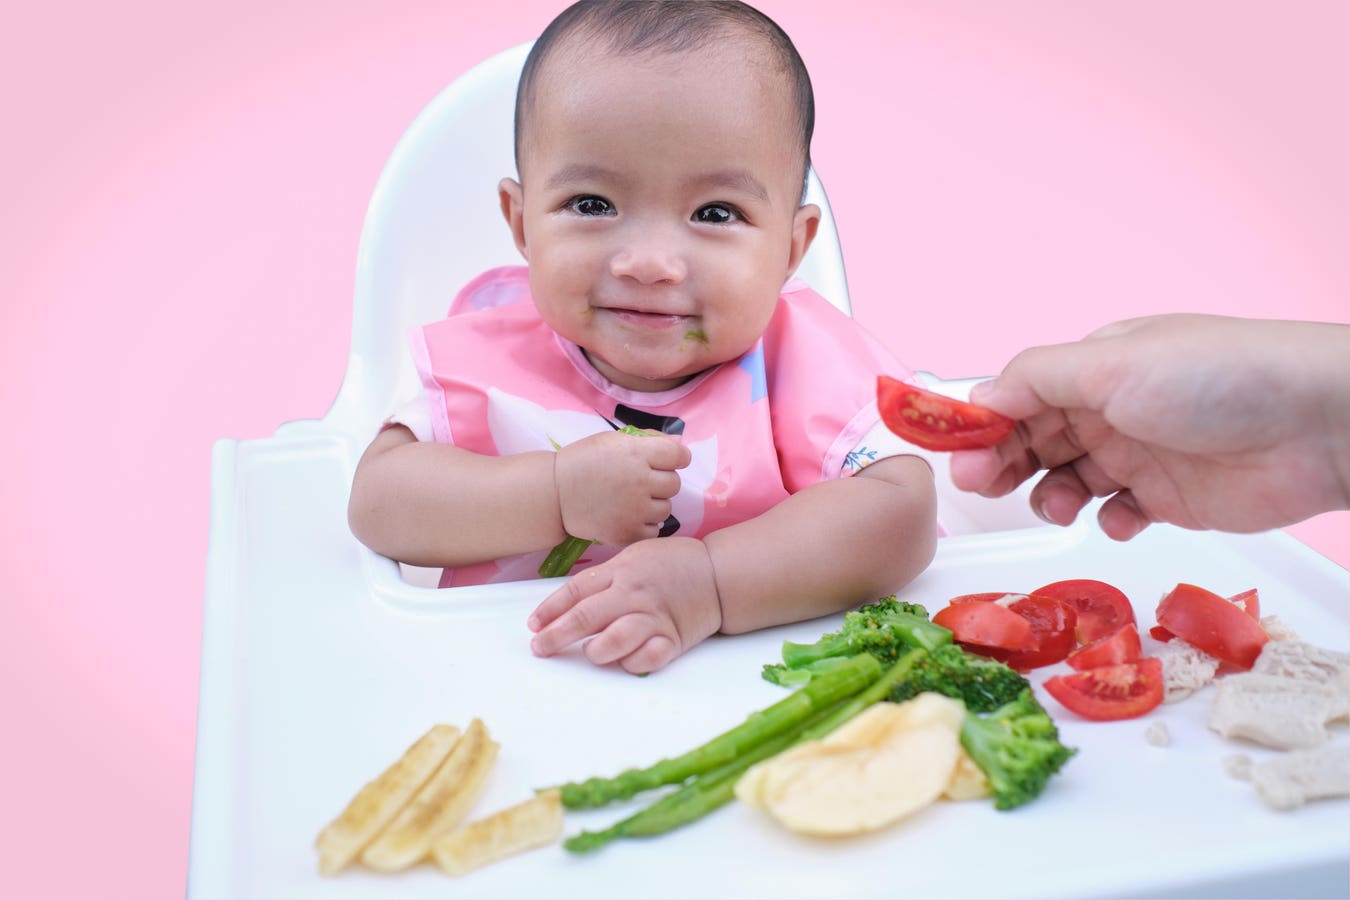 New Study Says Baby-Led Weaning May Have Advantages Over Other Methods